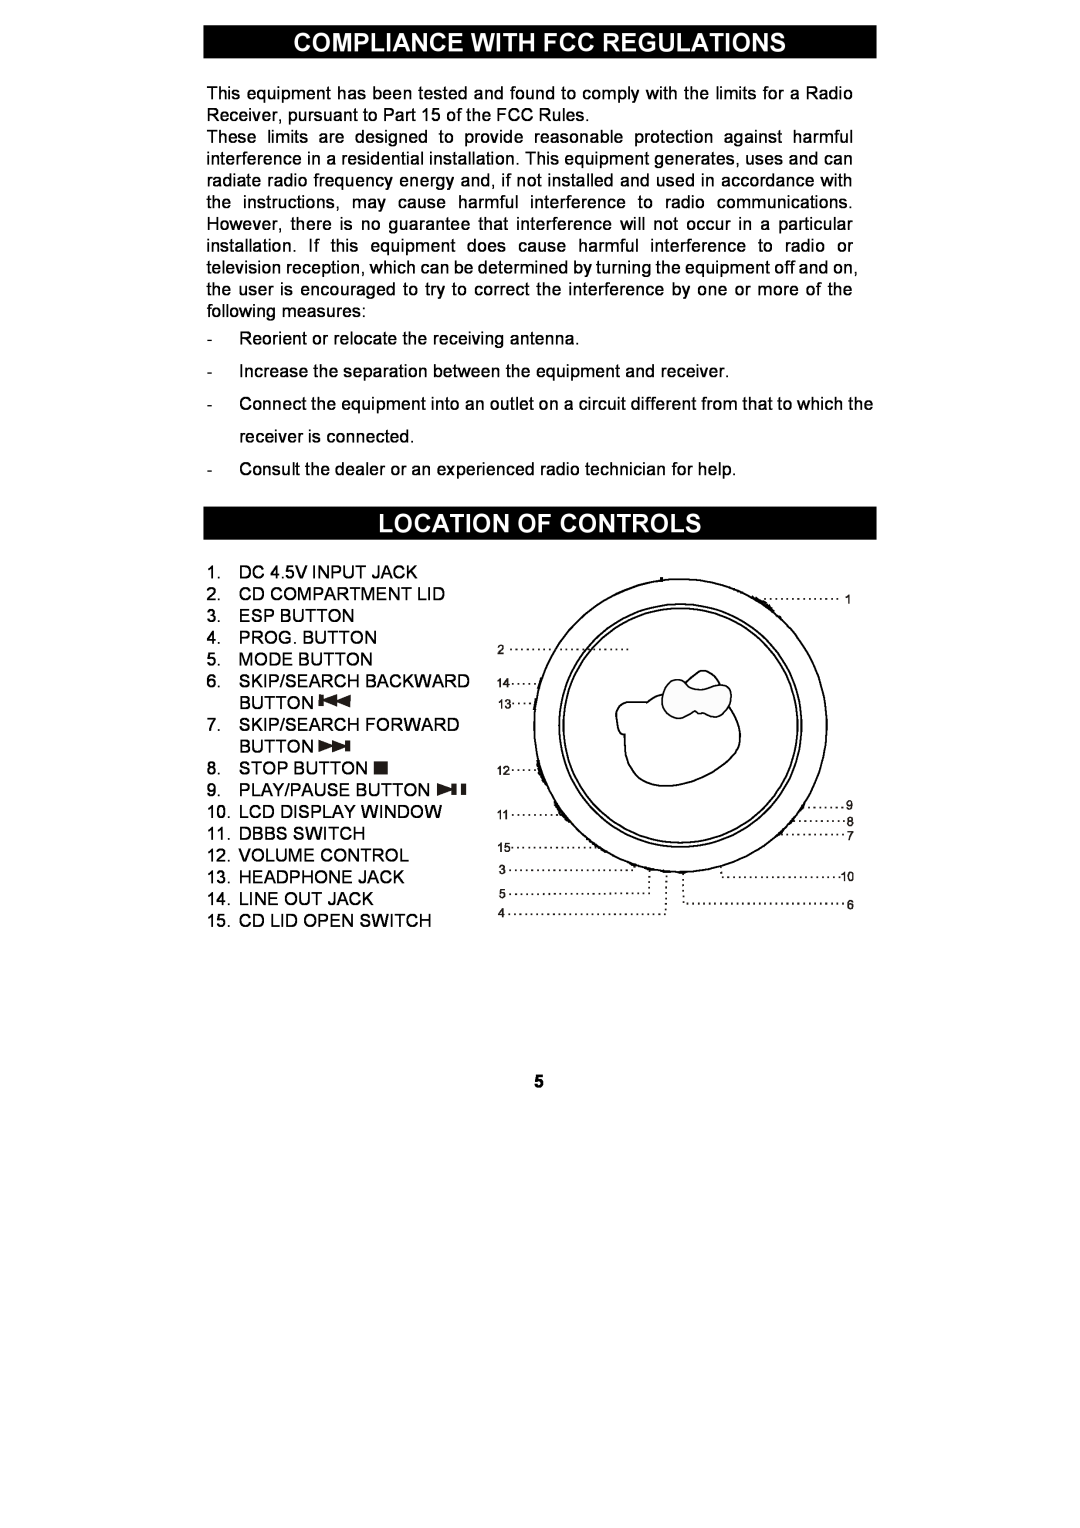 Spectra KT2038 owner manual Compliance With Fcc Regulations, Location Of Controls 